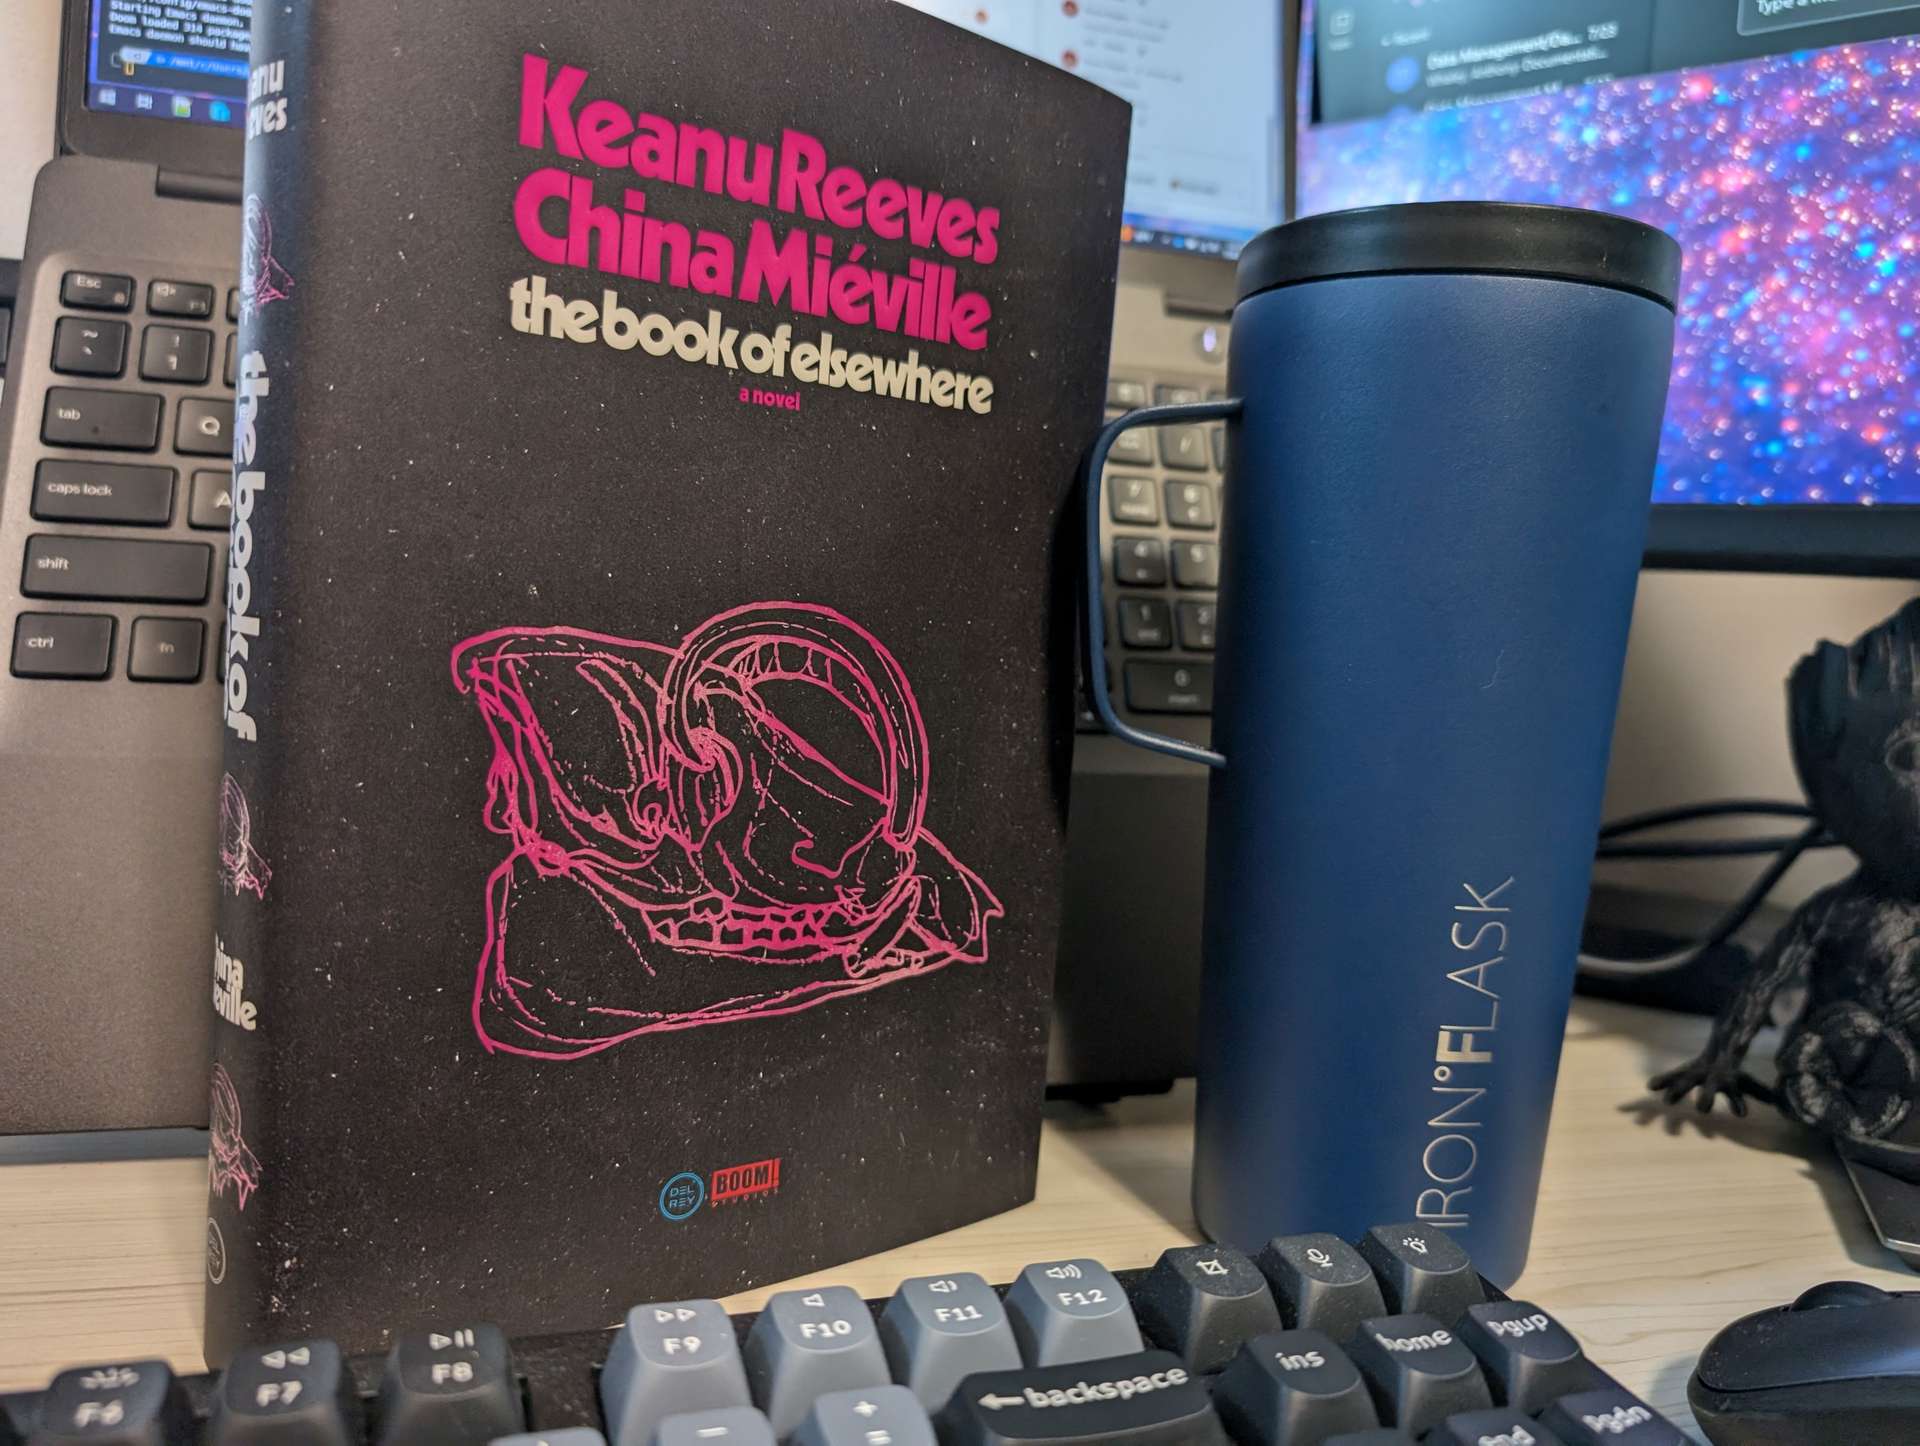 Photo of the book, "the book of elsewhere" by the authors Keanu Reeves and China Miéville. Next to the book is my blue coffee canister.